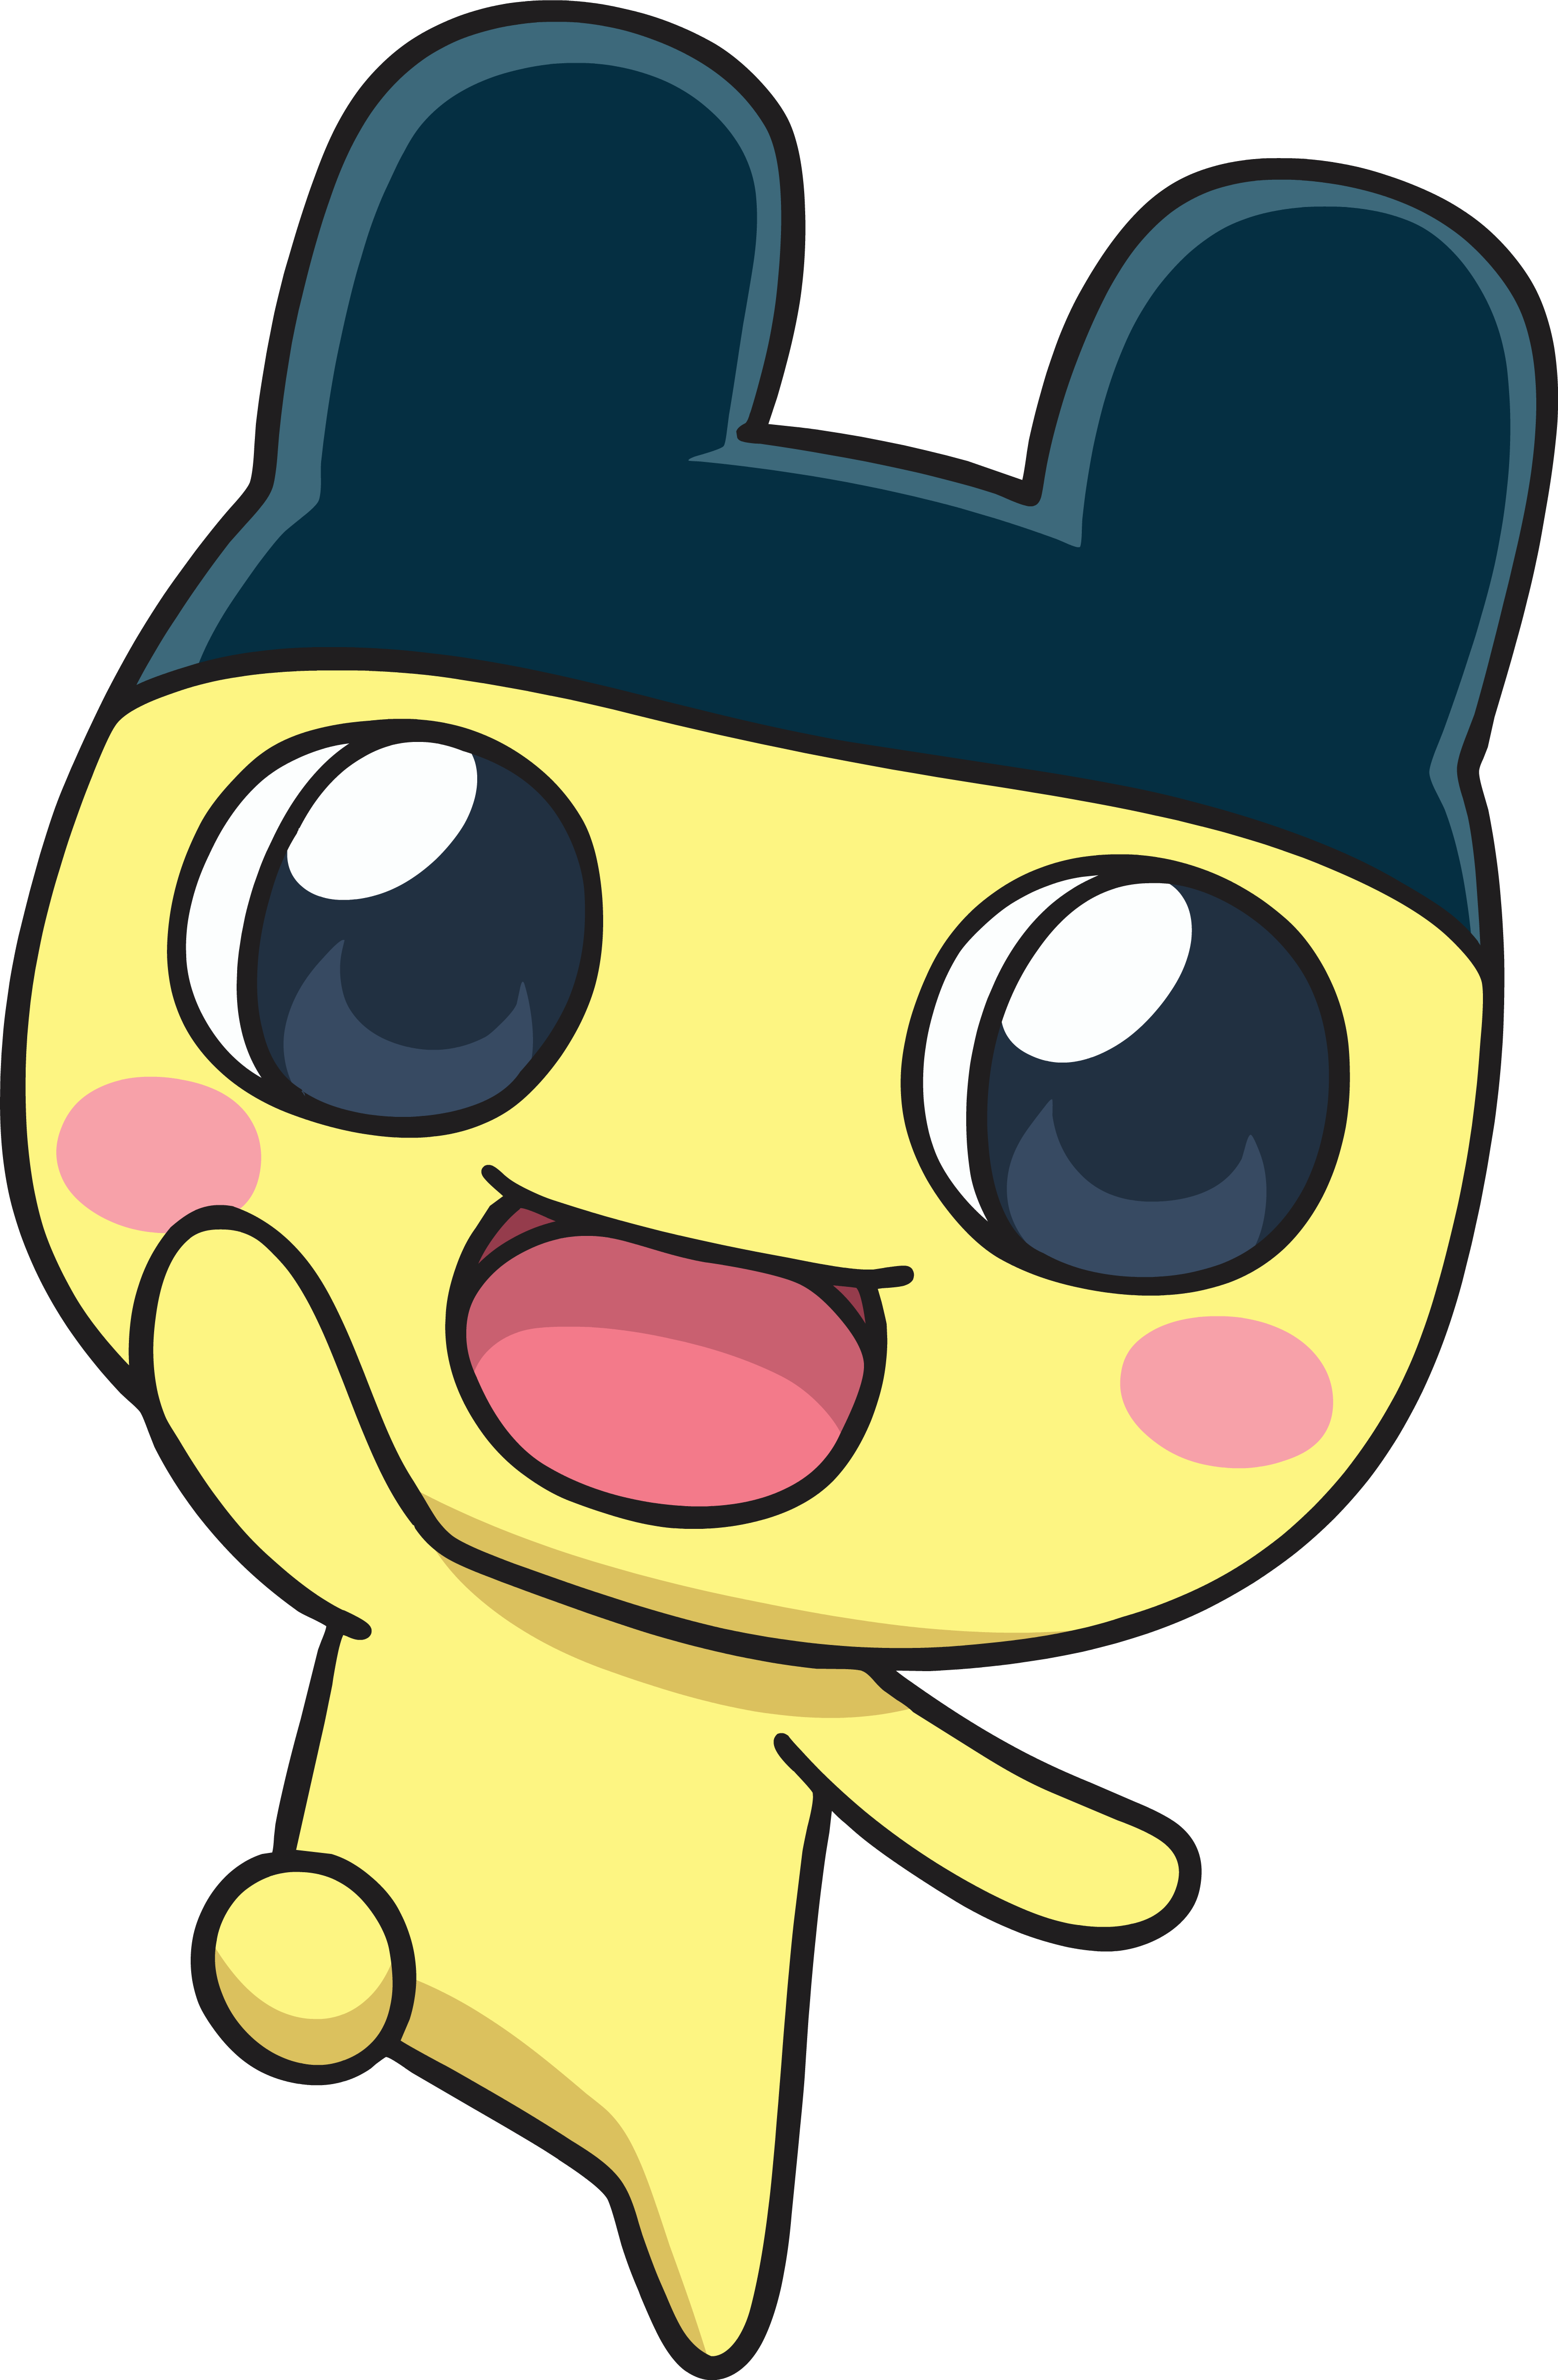 Mametchi Fan Casting for Tamagotchi Anime All-Stars | myCast - Fan Casting  Your Favorite Stories